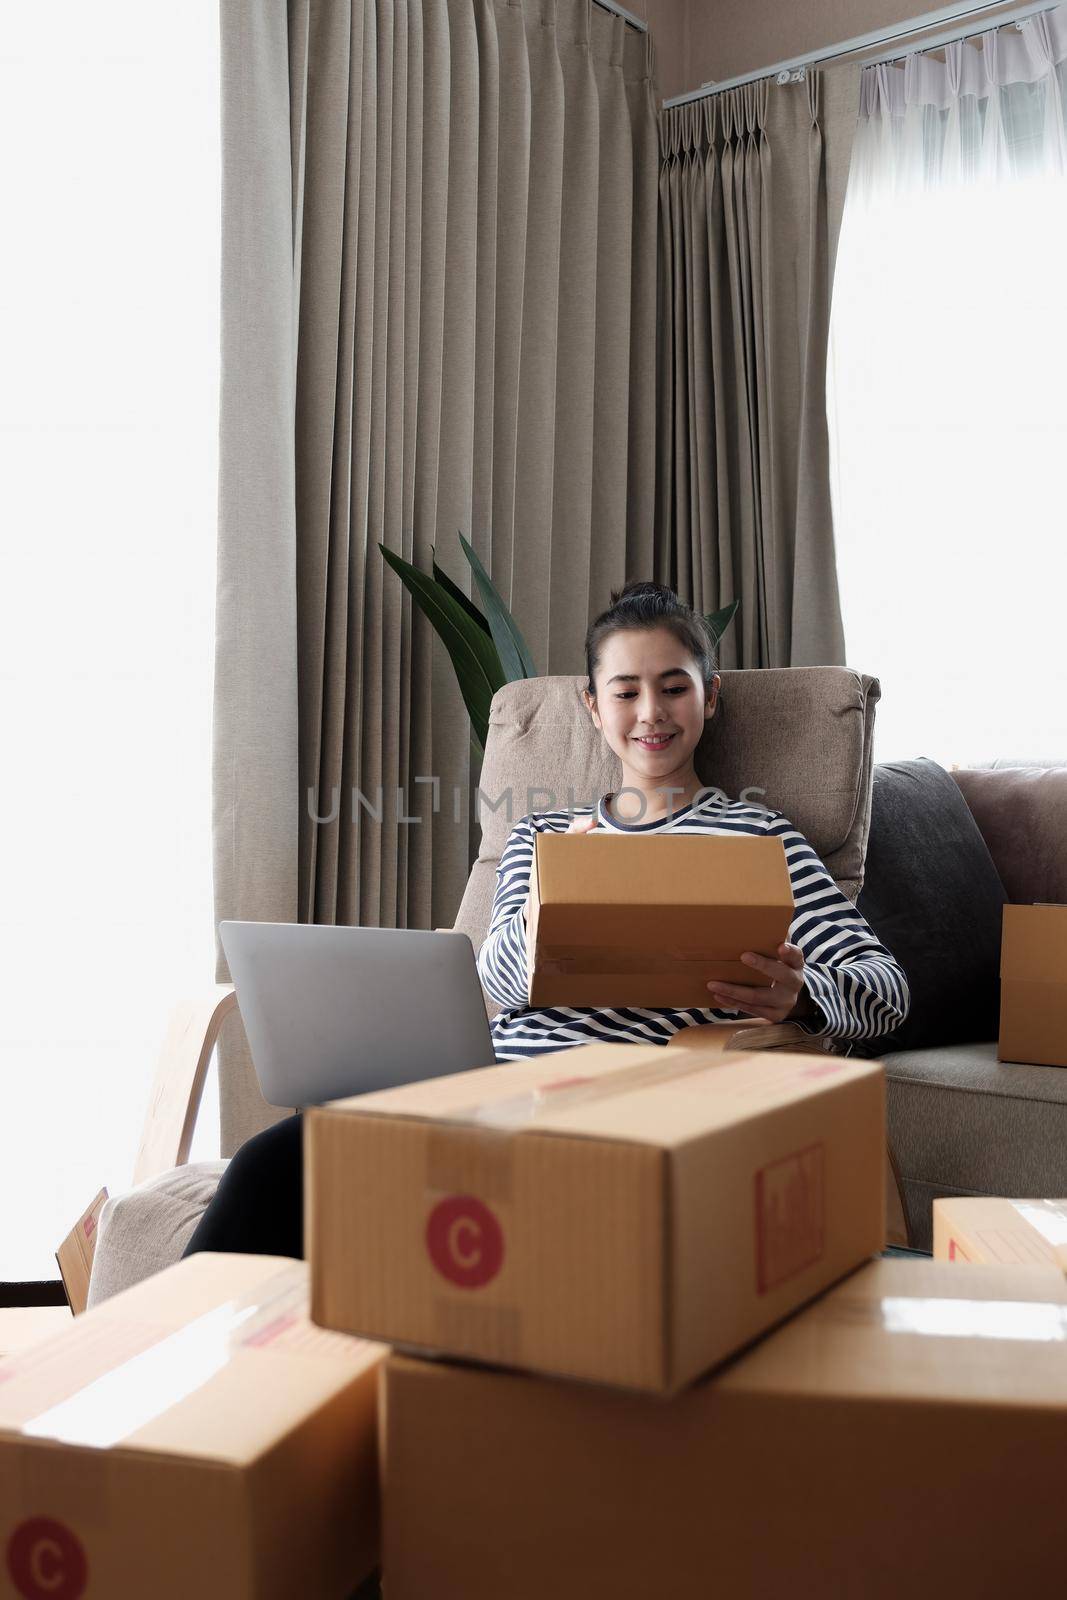 Business Start up SME concept. Young startup entrepreneur small business owner working at home, packaging and delivery situation. Women, owener of small business packing product in boxes.